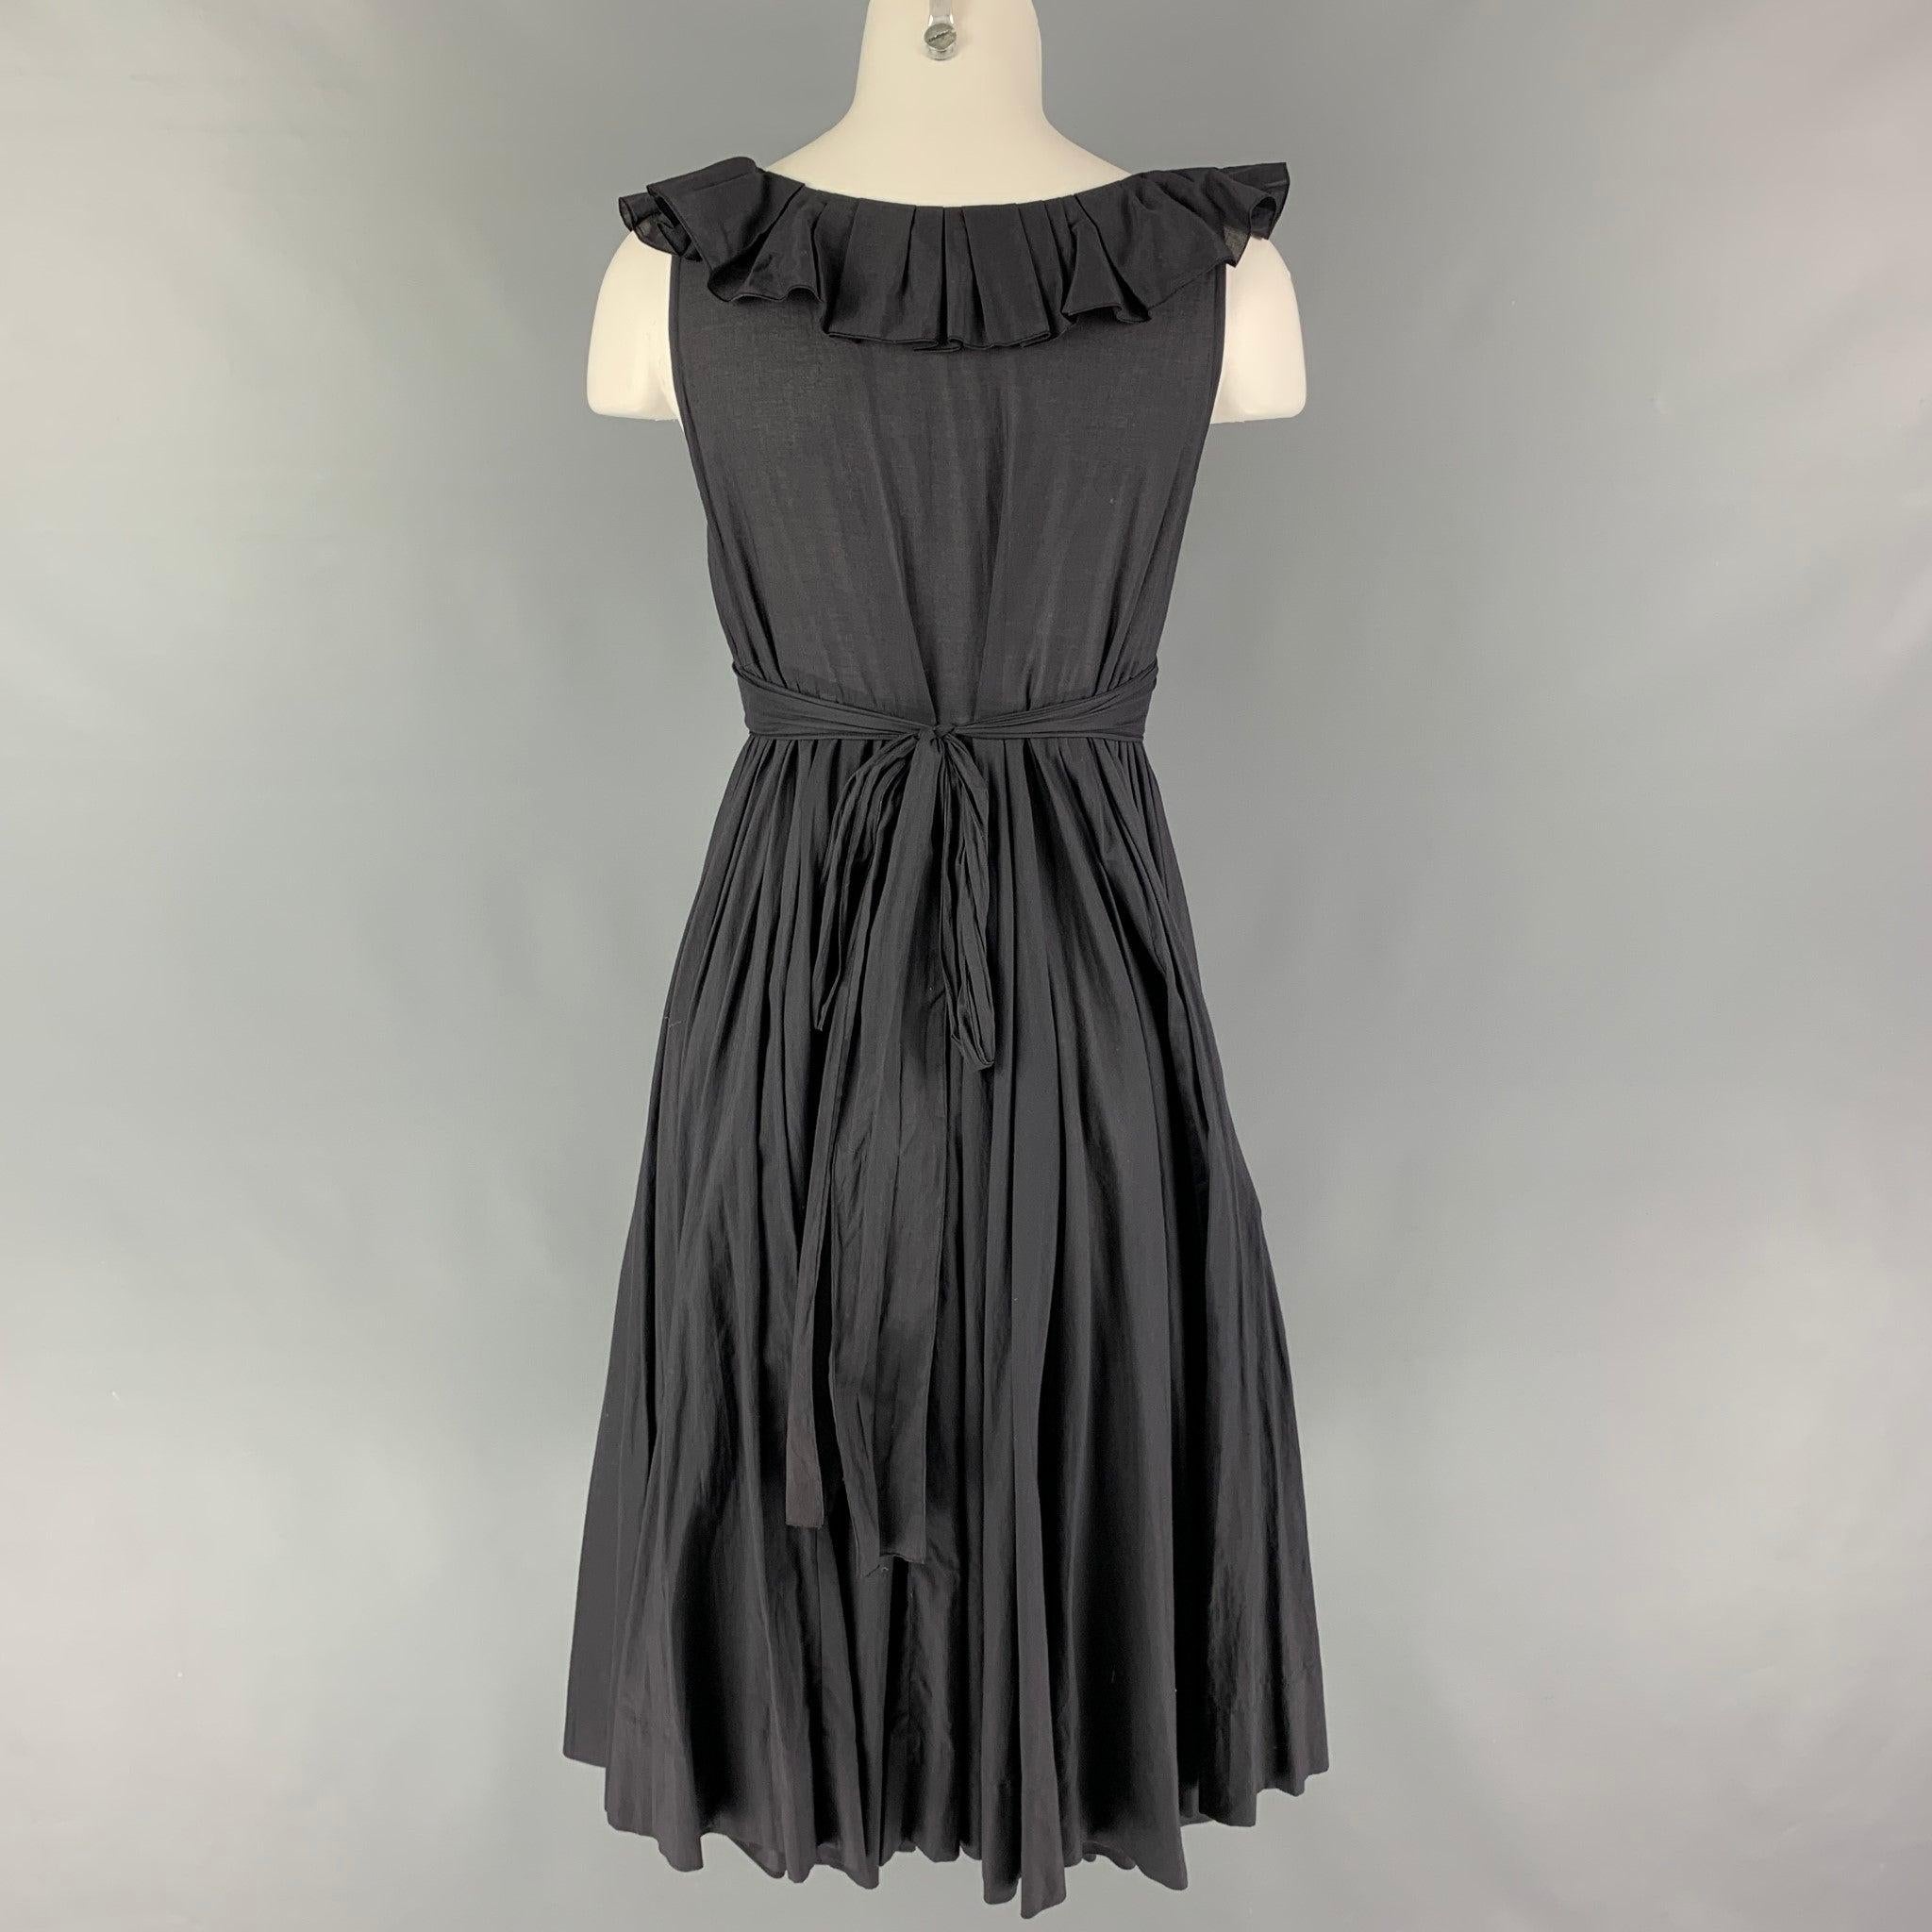 SONIA RYKIEL Size 4 Slate Black Cotton Applique Sleeveless Dress In Good Condition For Sale In San Francisco, CA